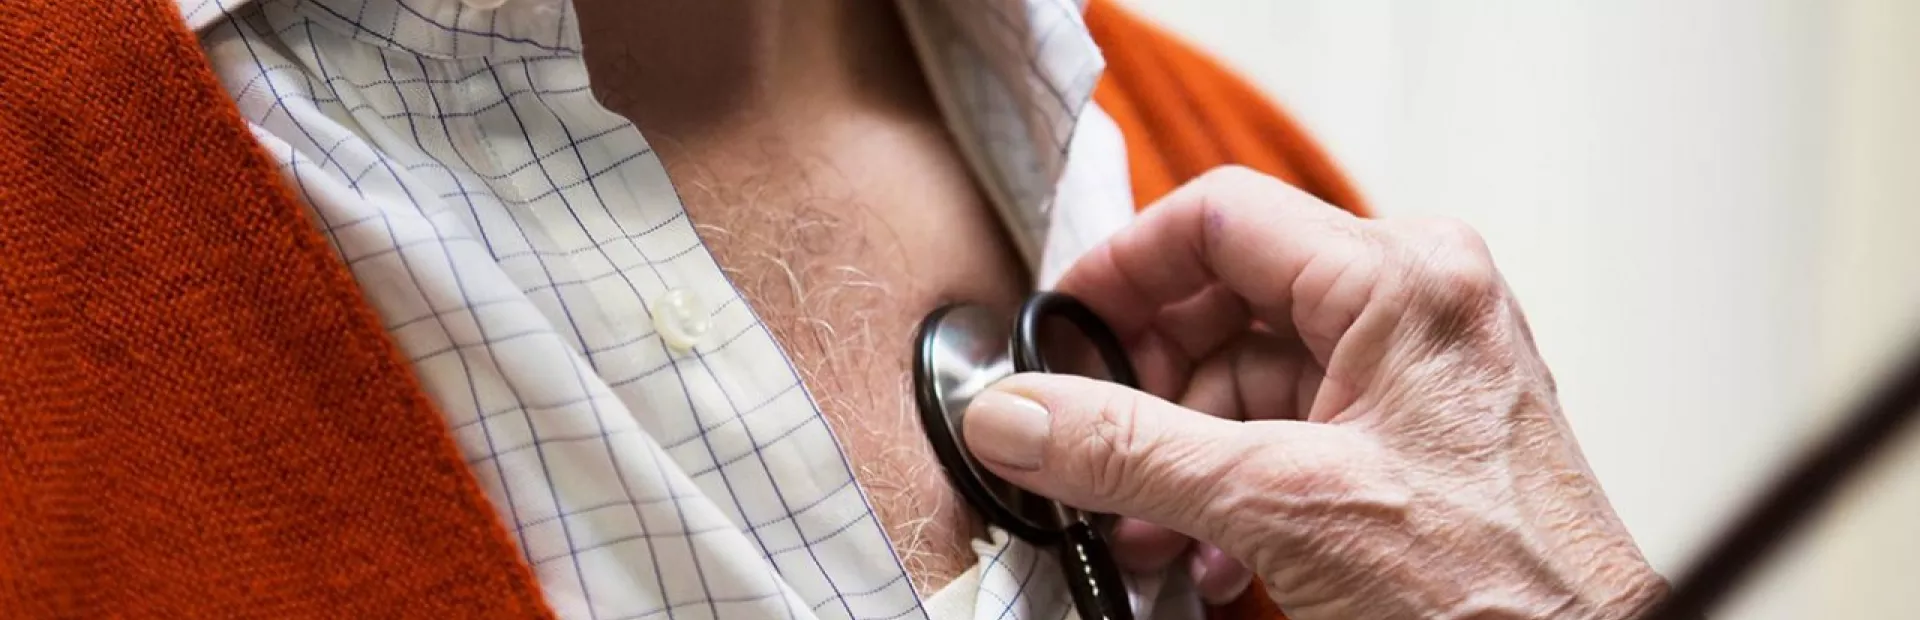 Heart failure patient receives care from his doctor